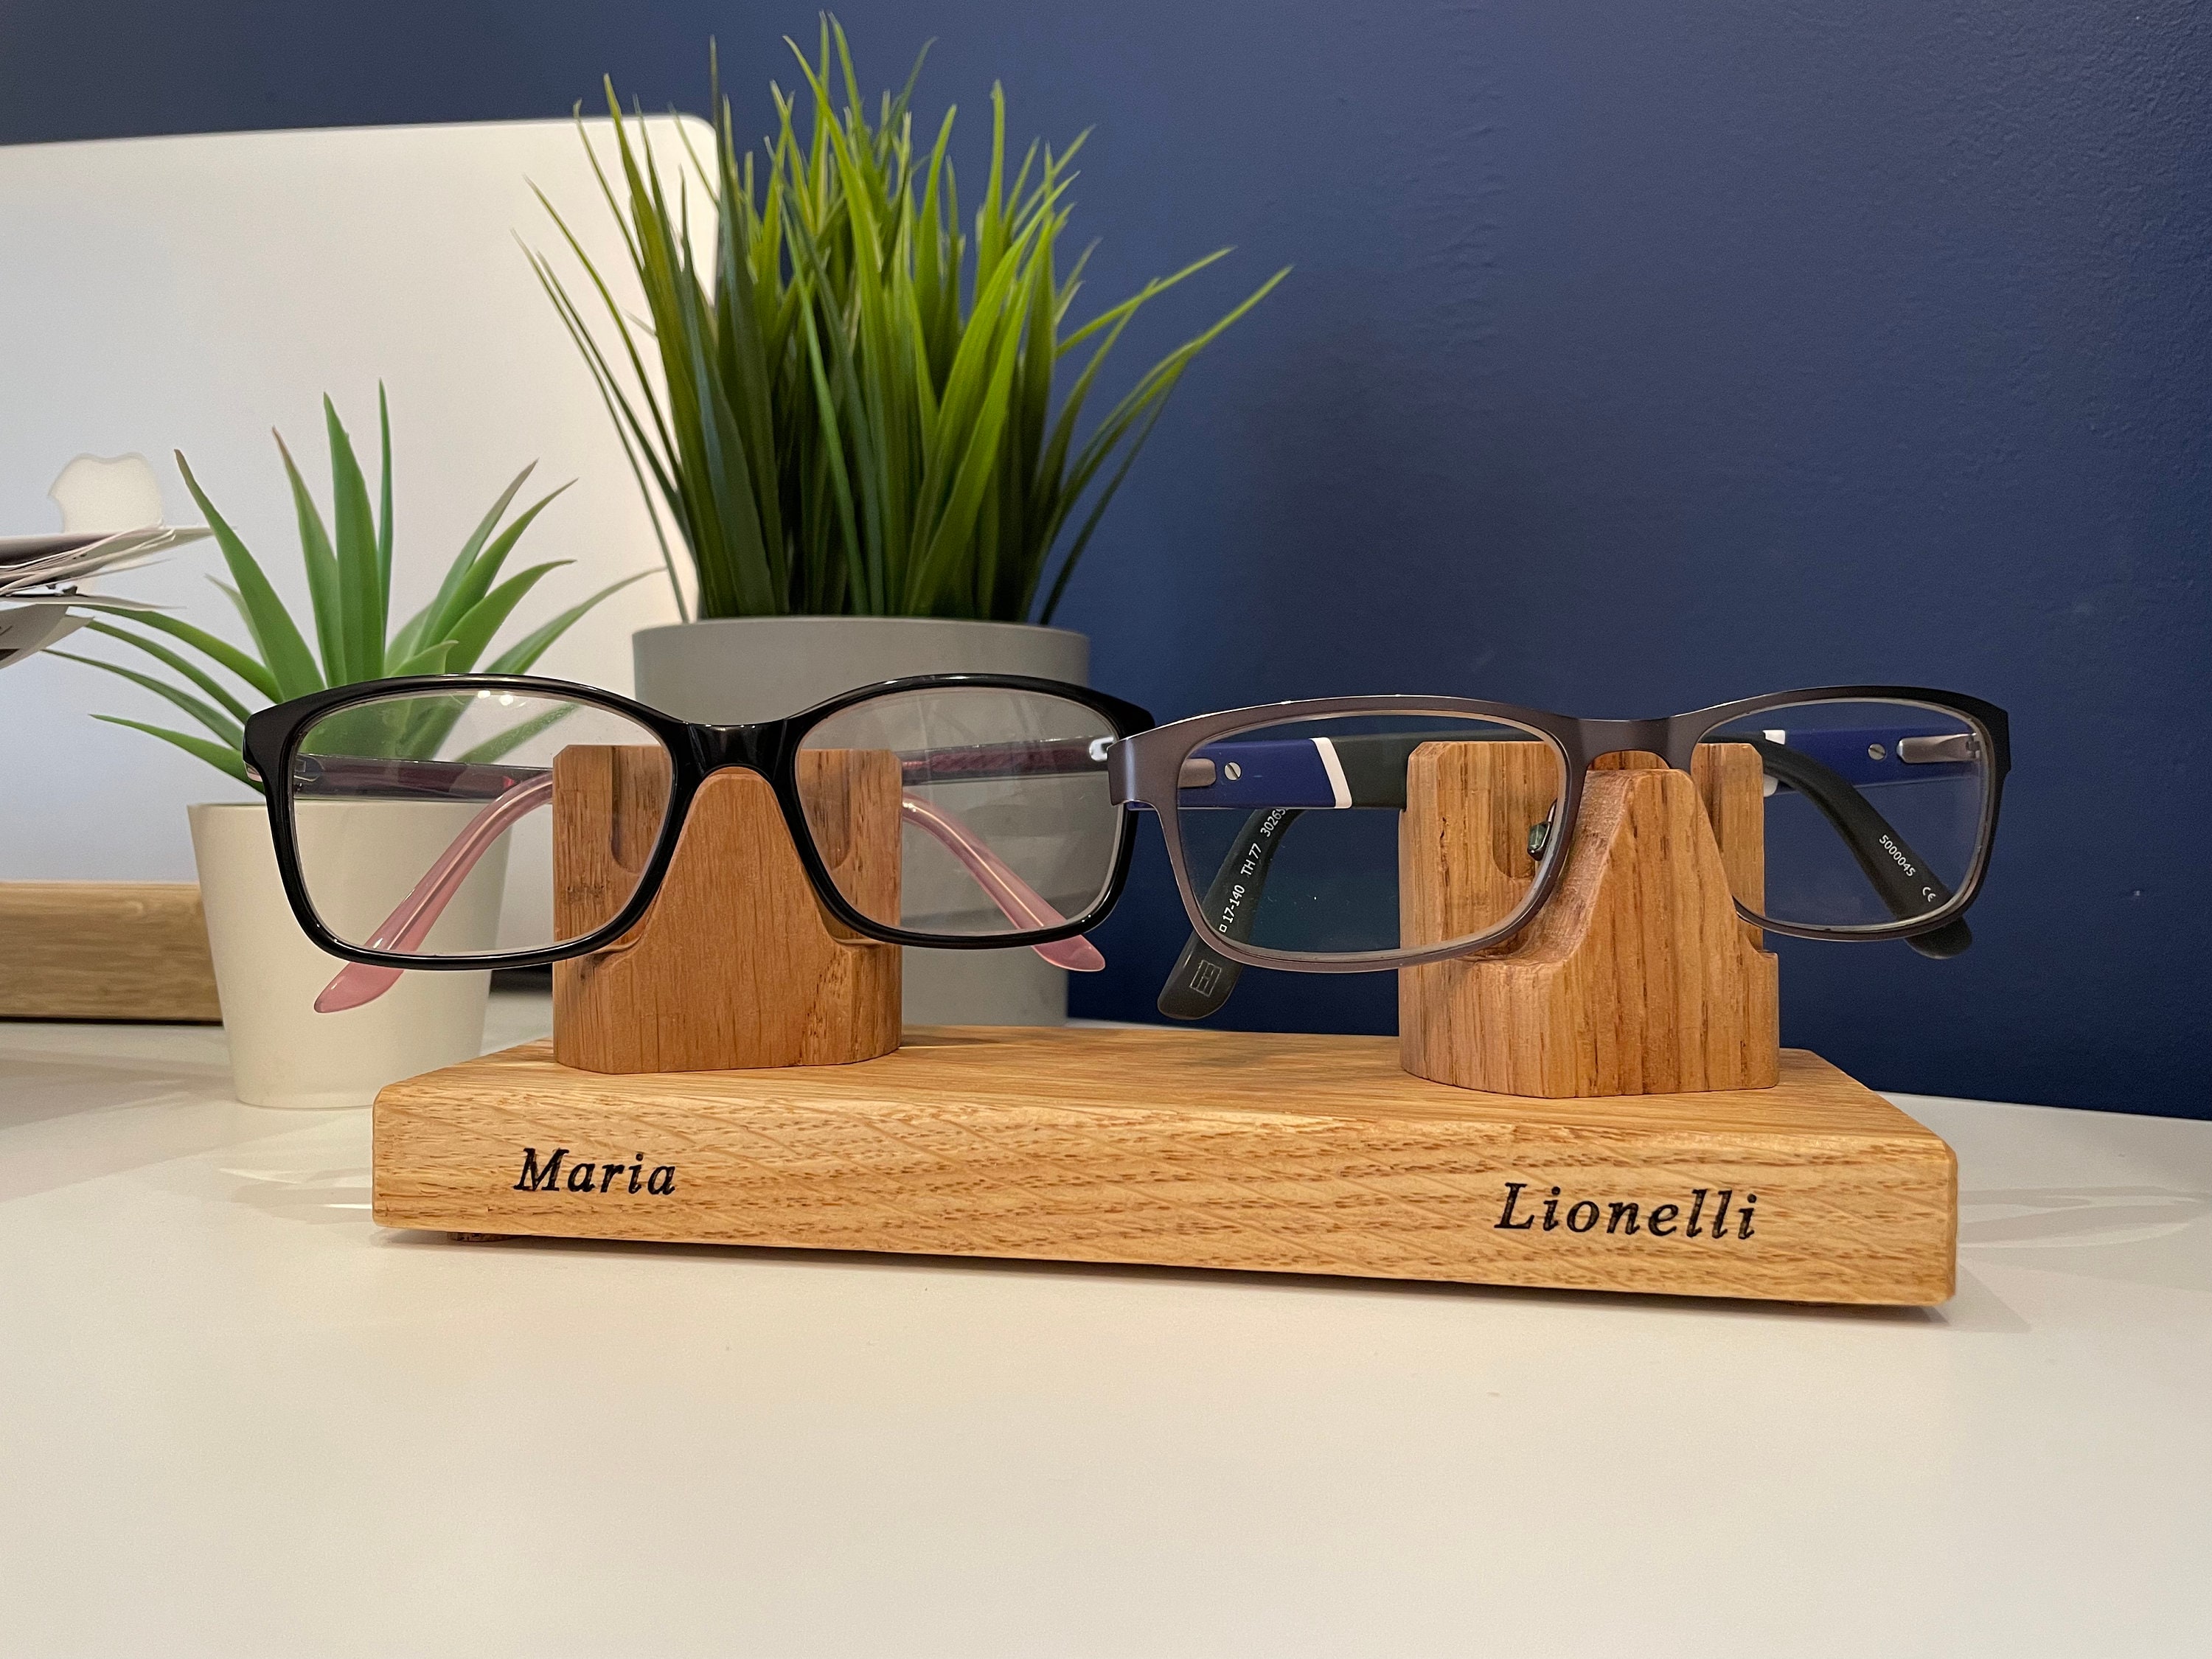 Solid Oak Personalised Glasses Stand / Gifts for Grandparents